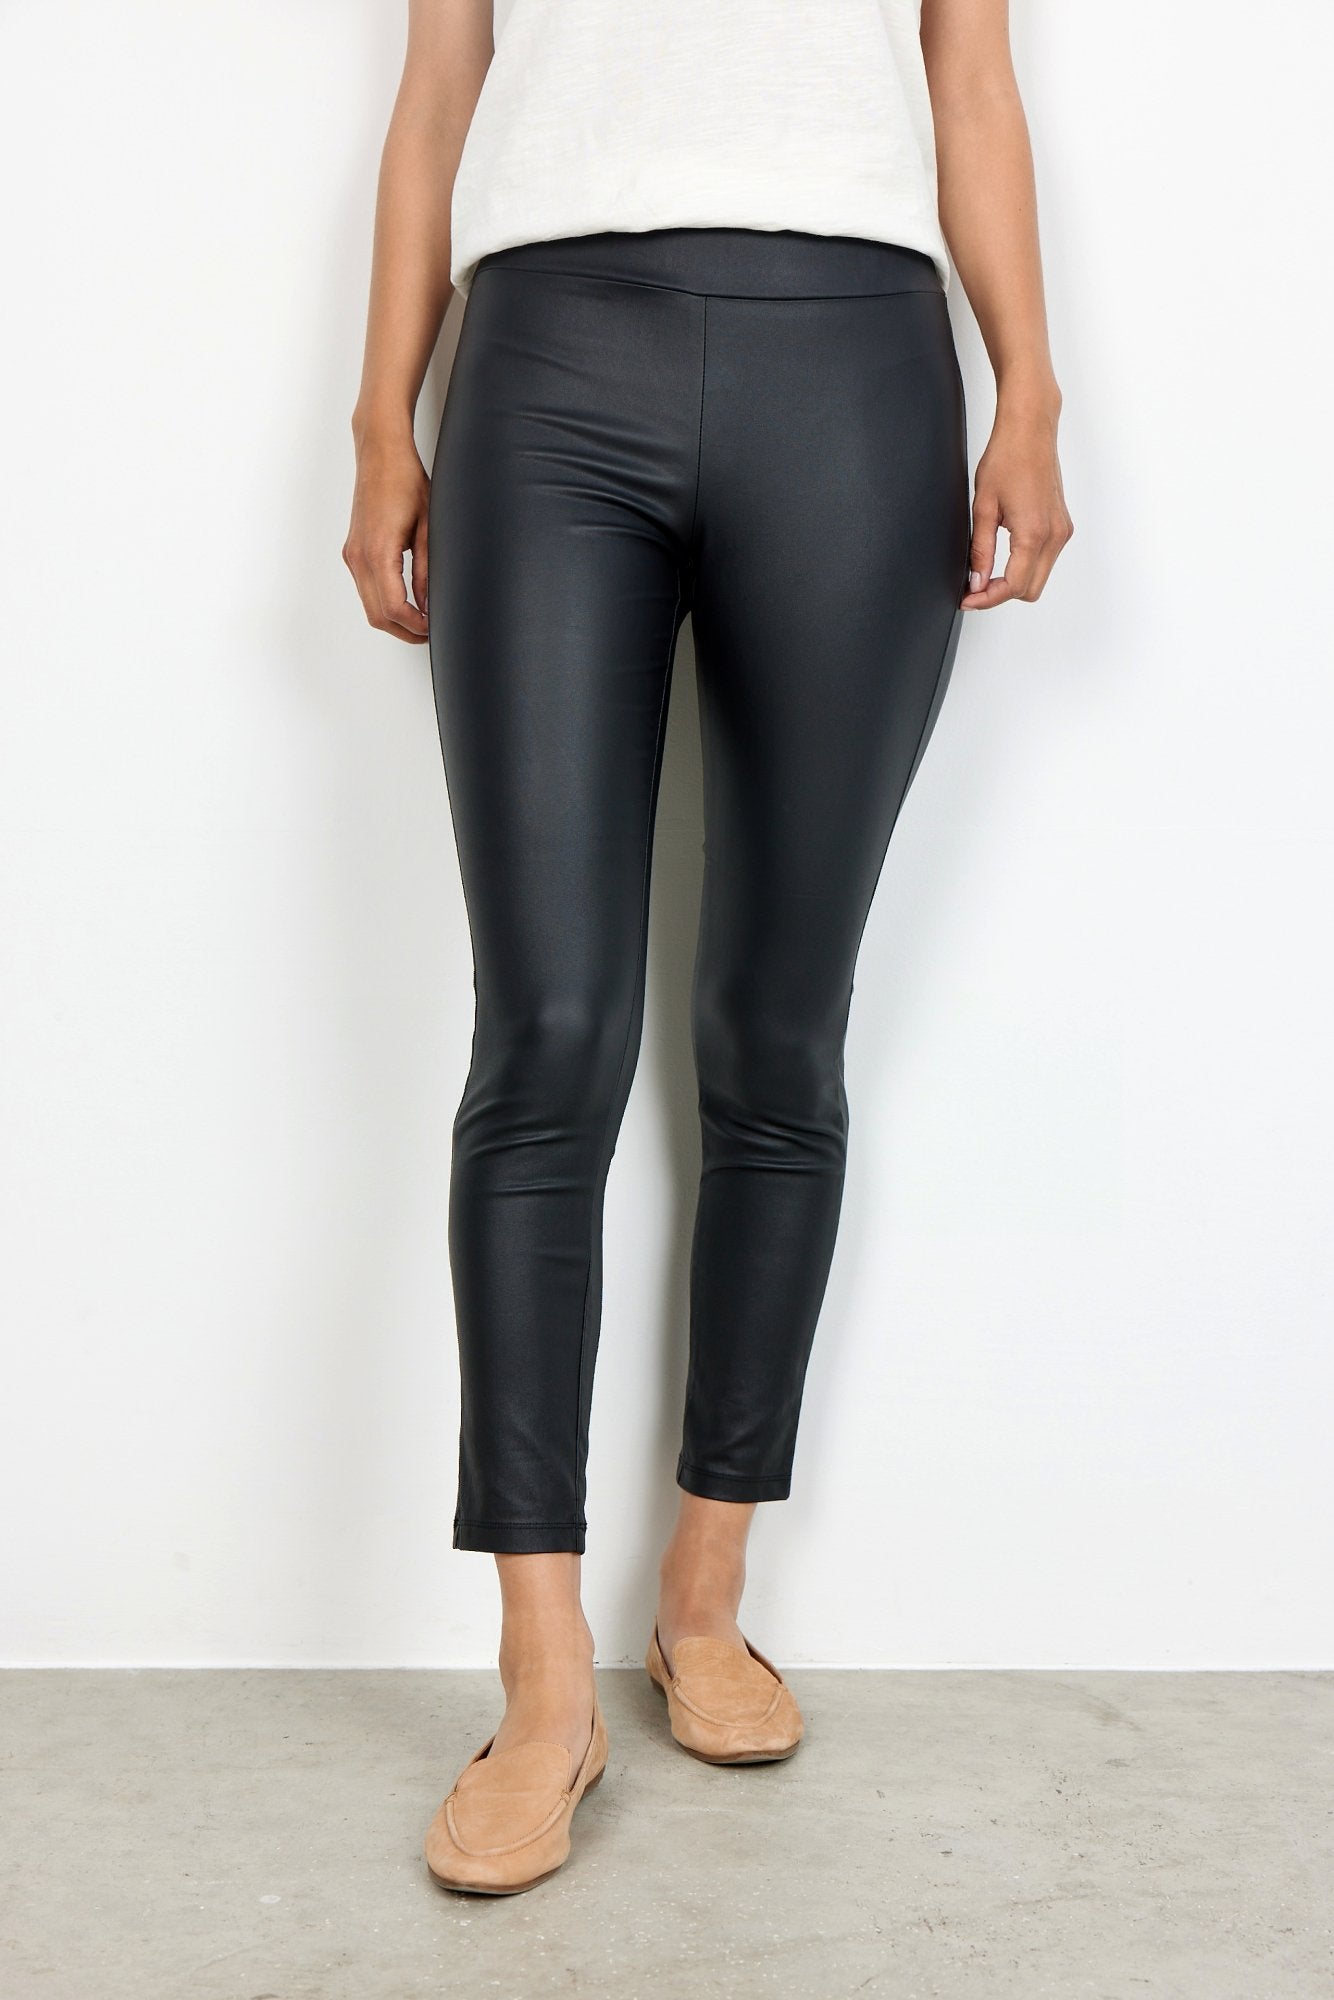 SC-PAM 2-B Pants in Black soyaconcept Soyaconcept from soyaconcept | –